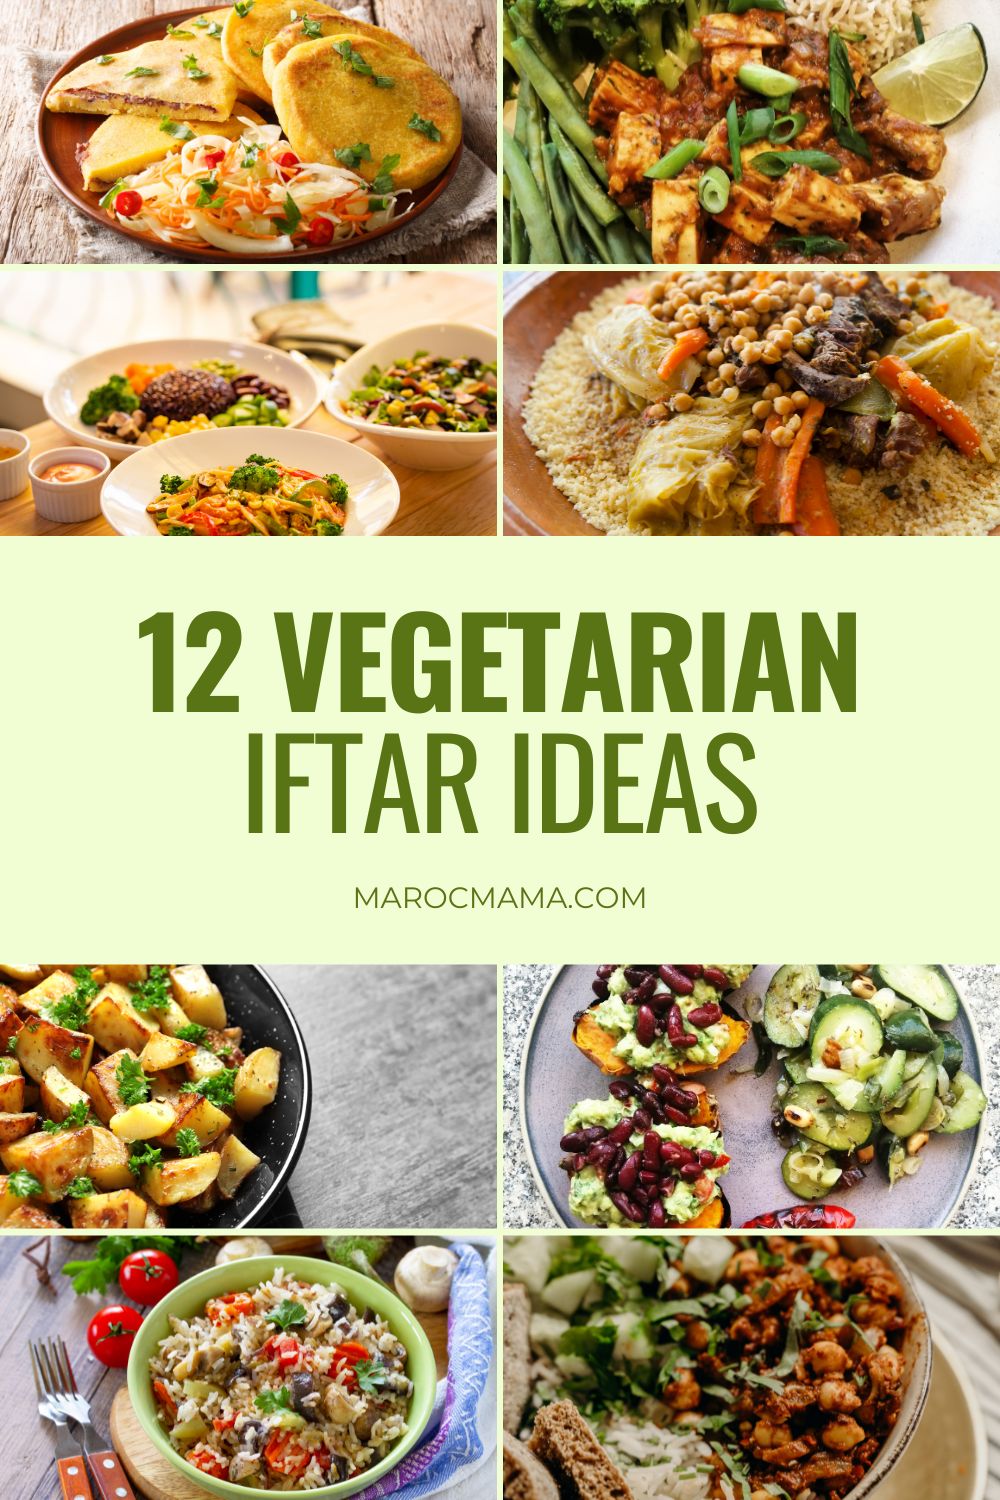 Various vegetarian iftar recipes and meals with the text 12 Vegetarian Iftar Ideas